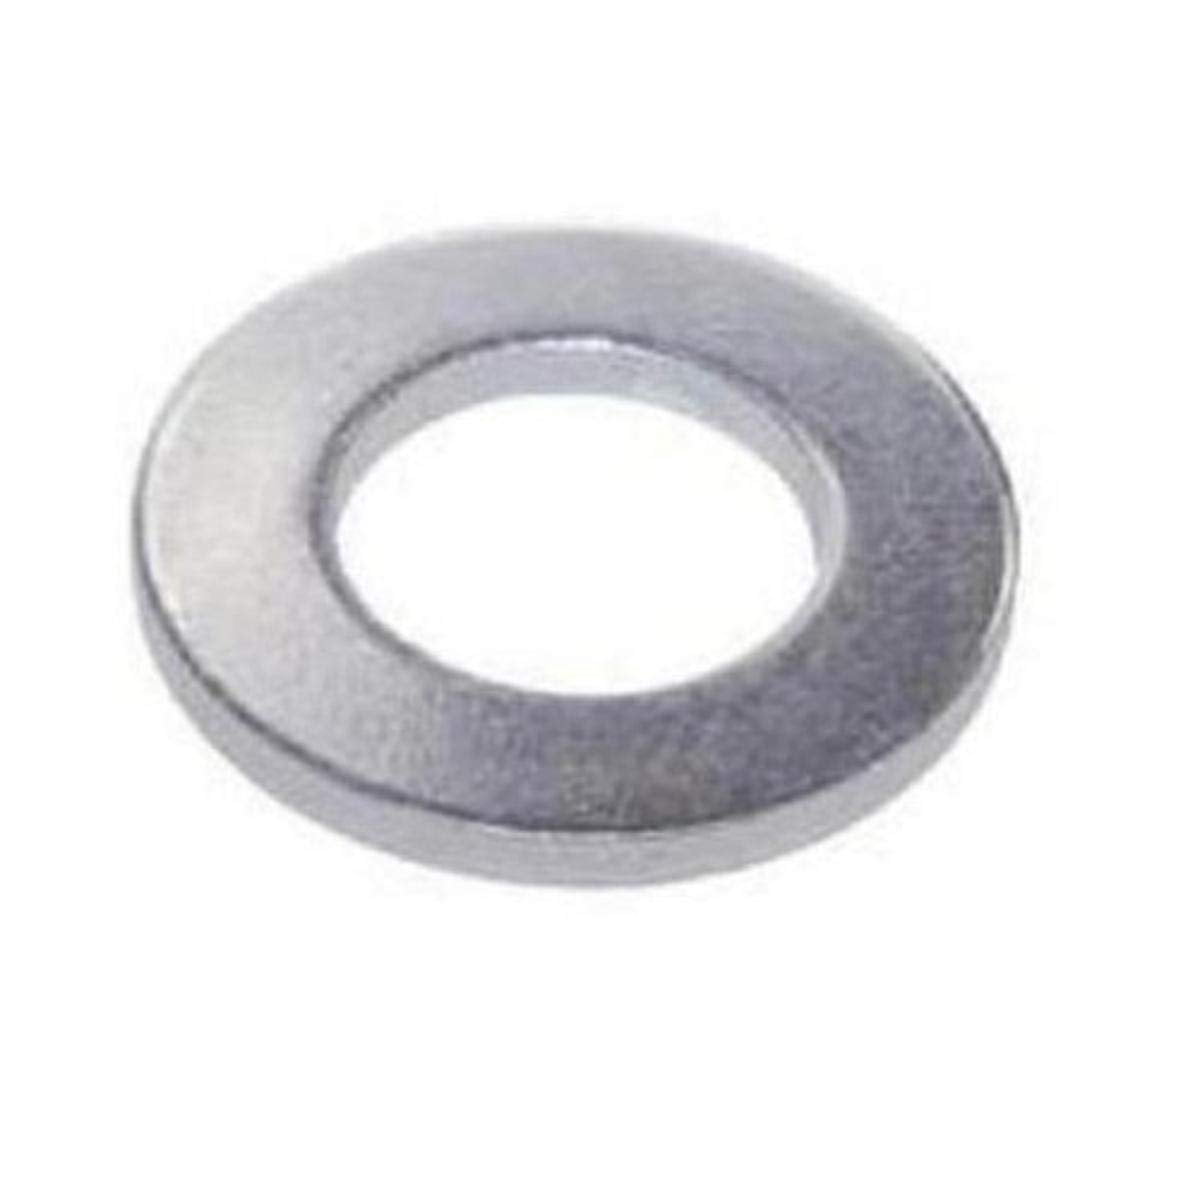 7/16" ID 18-8 Stainless Steel SAE Flat Washers Pack of 50 